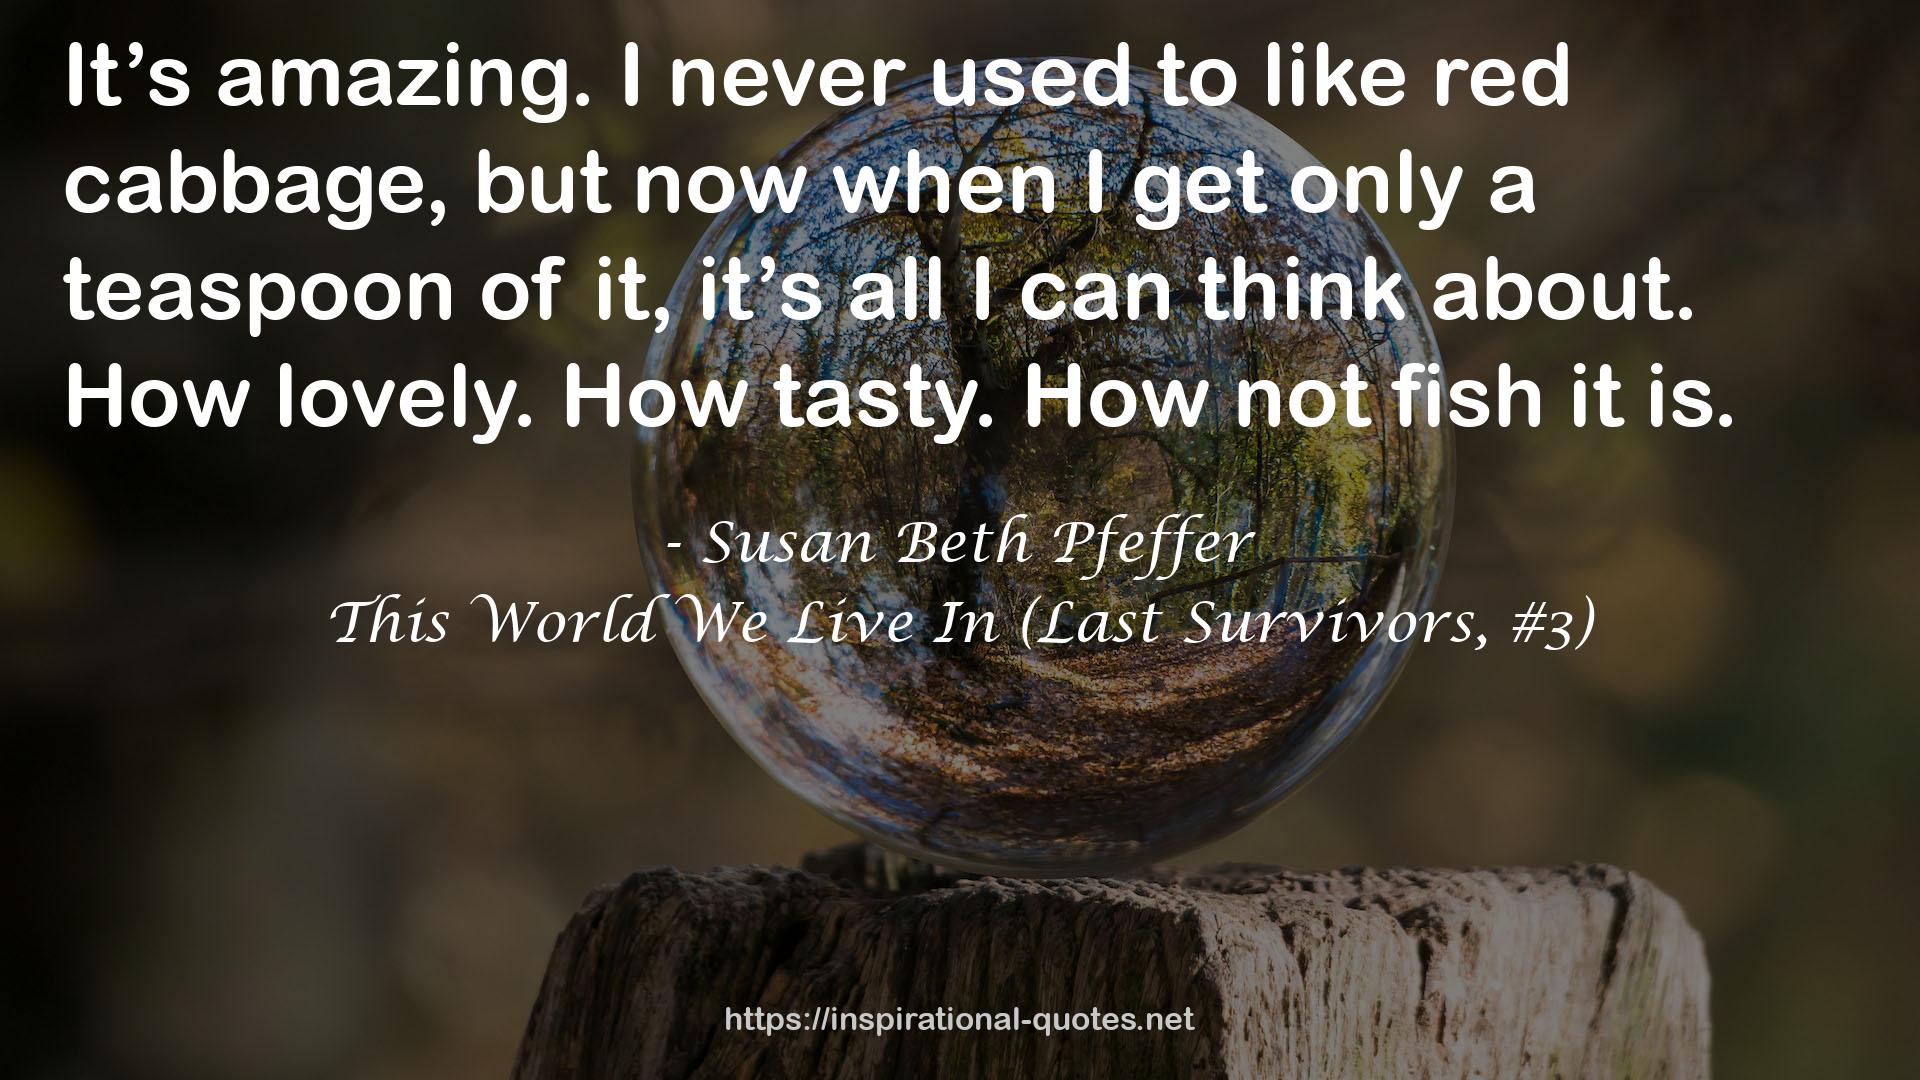 This World We Live In (Last Survivors, #3) QUOTES